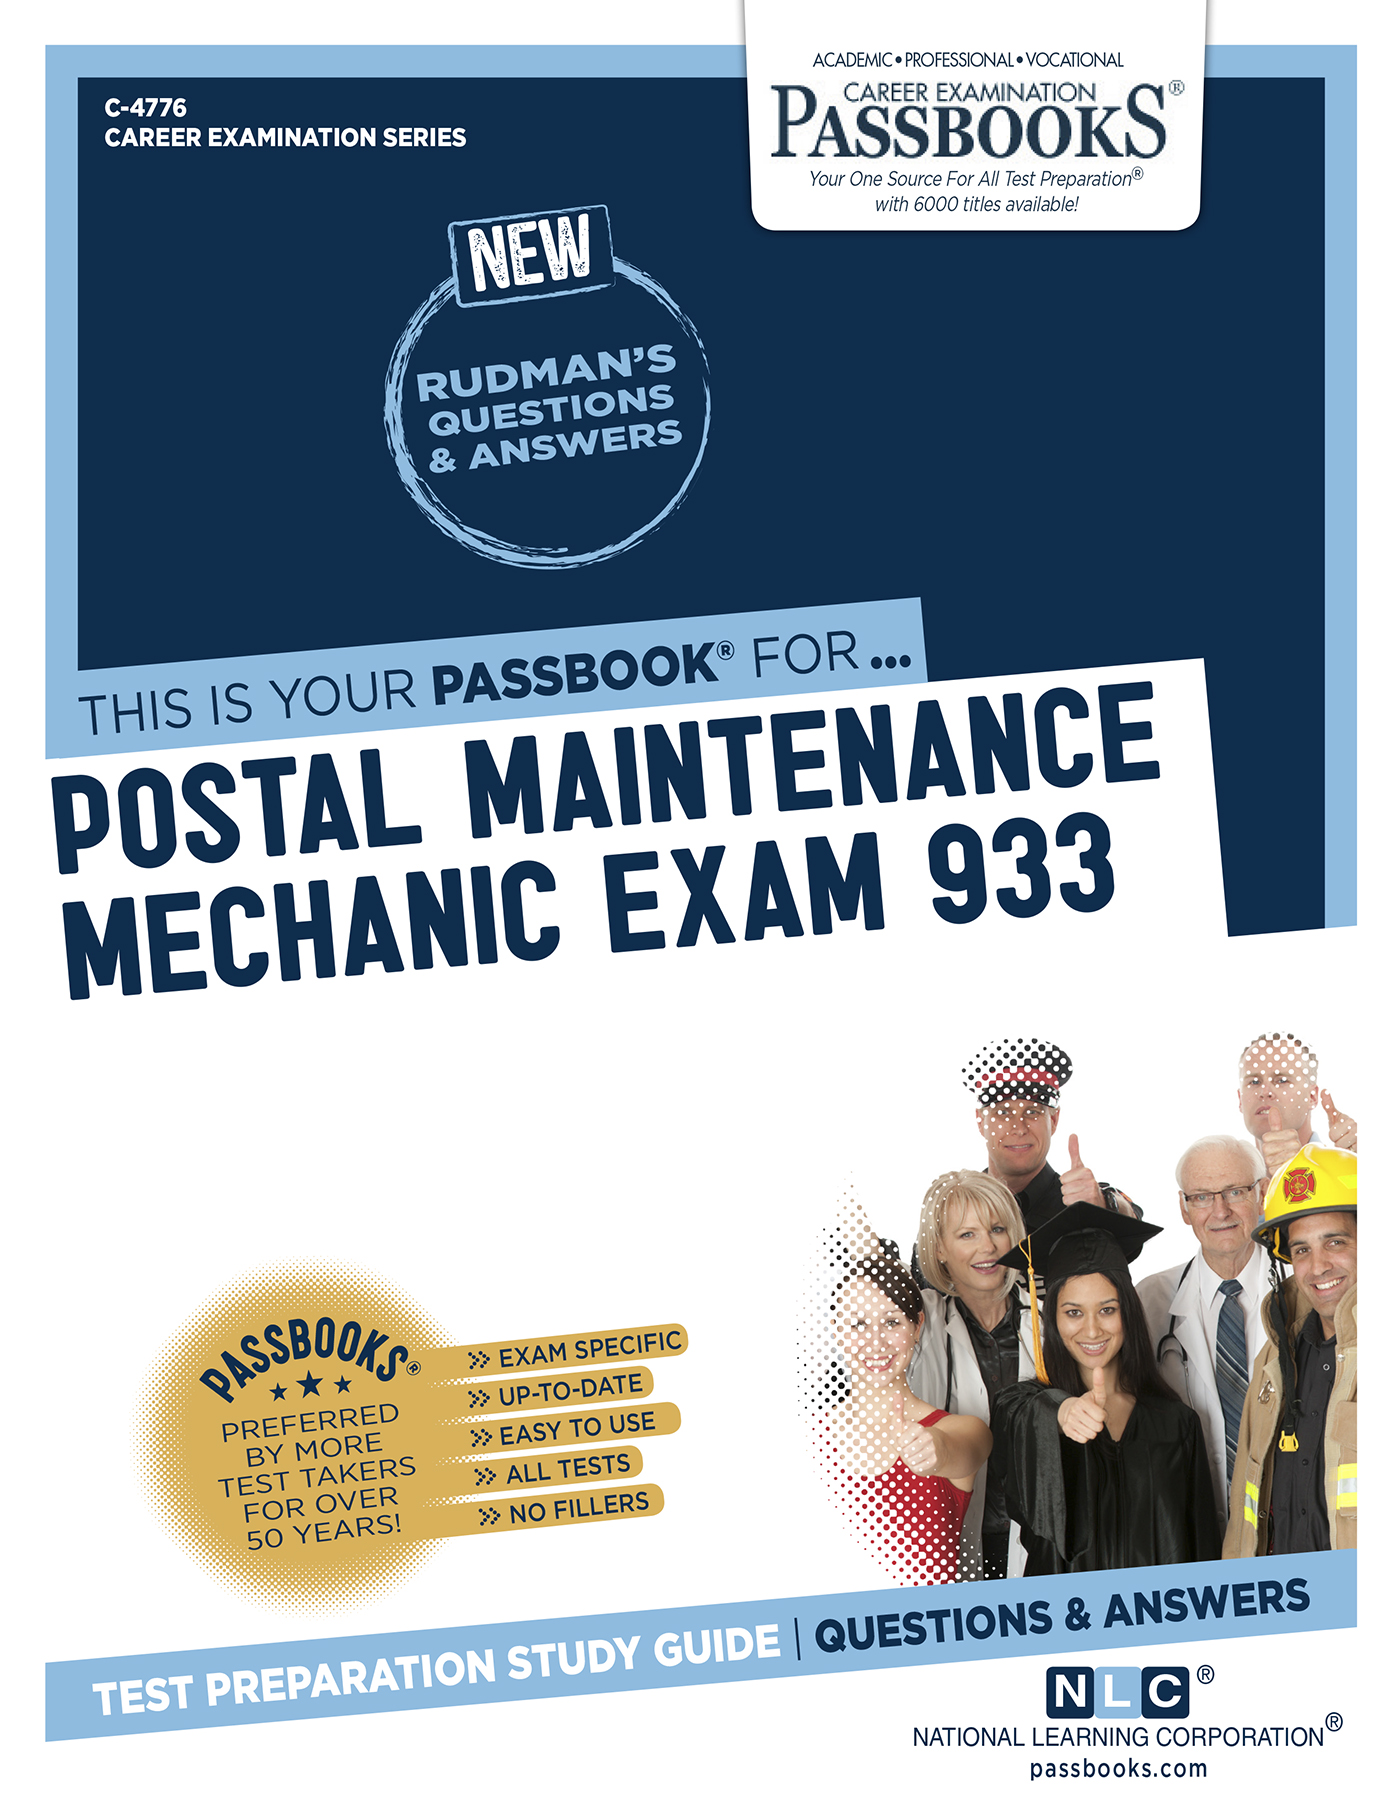 This image is the cover for the book Postal Maintenance Mechanic Exam 933, Career Examination Series